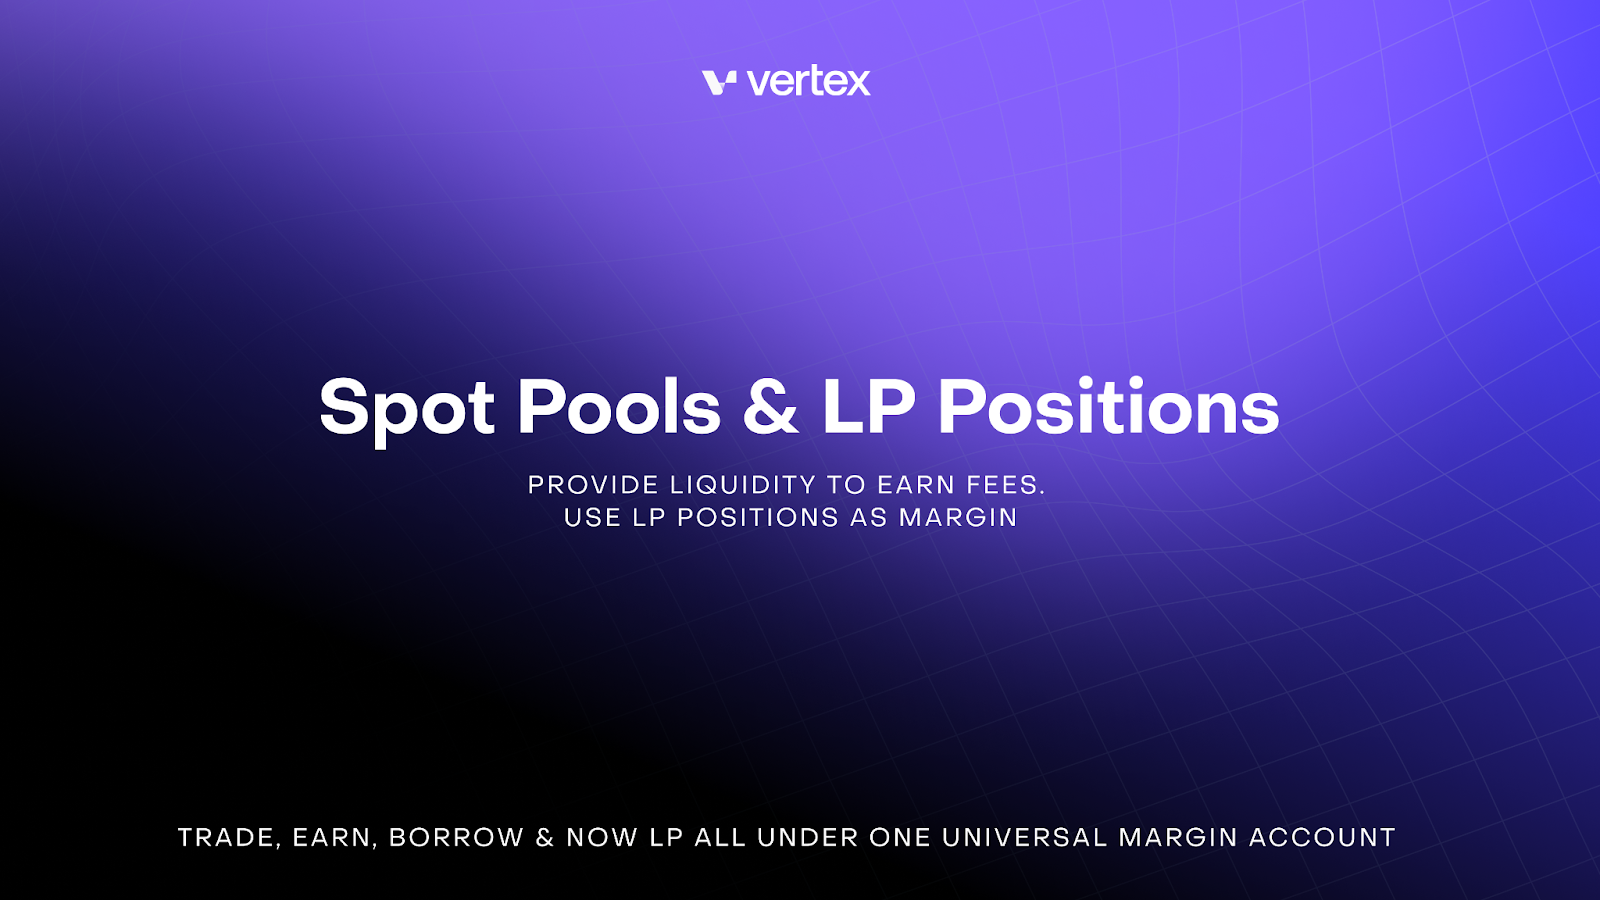 Introducing Spot Pools -  Earn Fees & Utilize Your LP Position as Margin